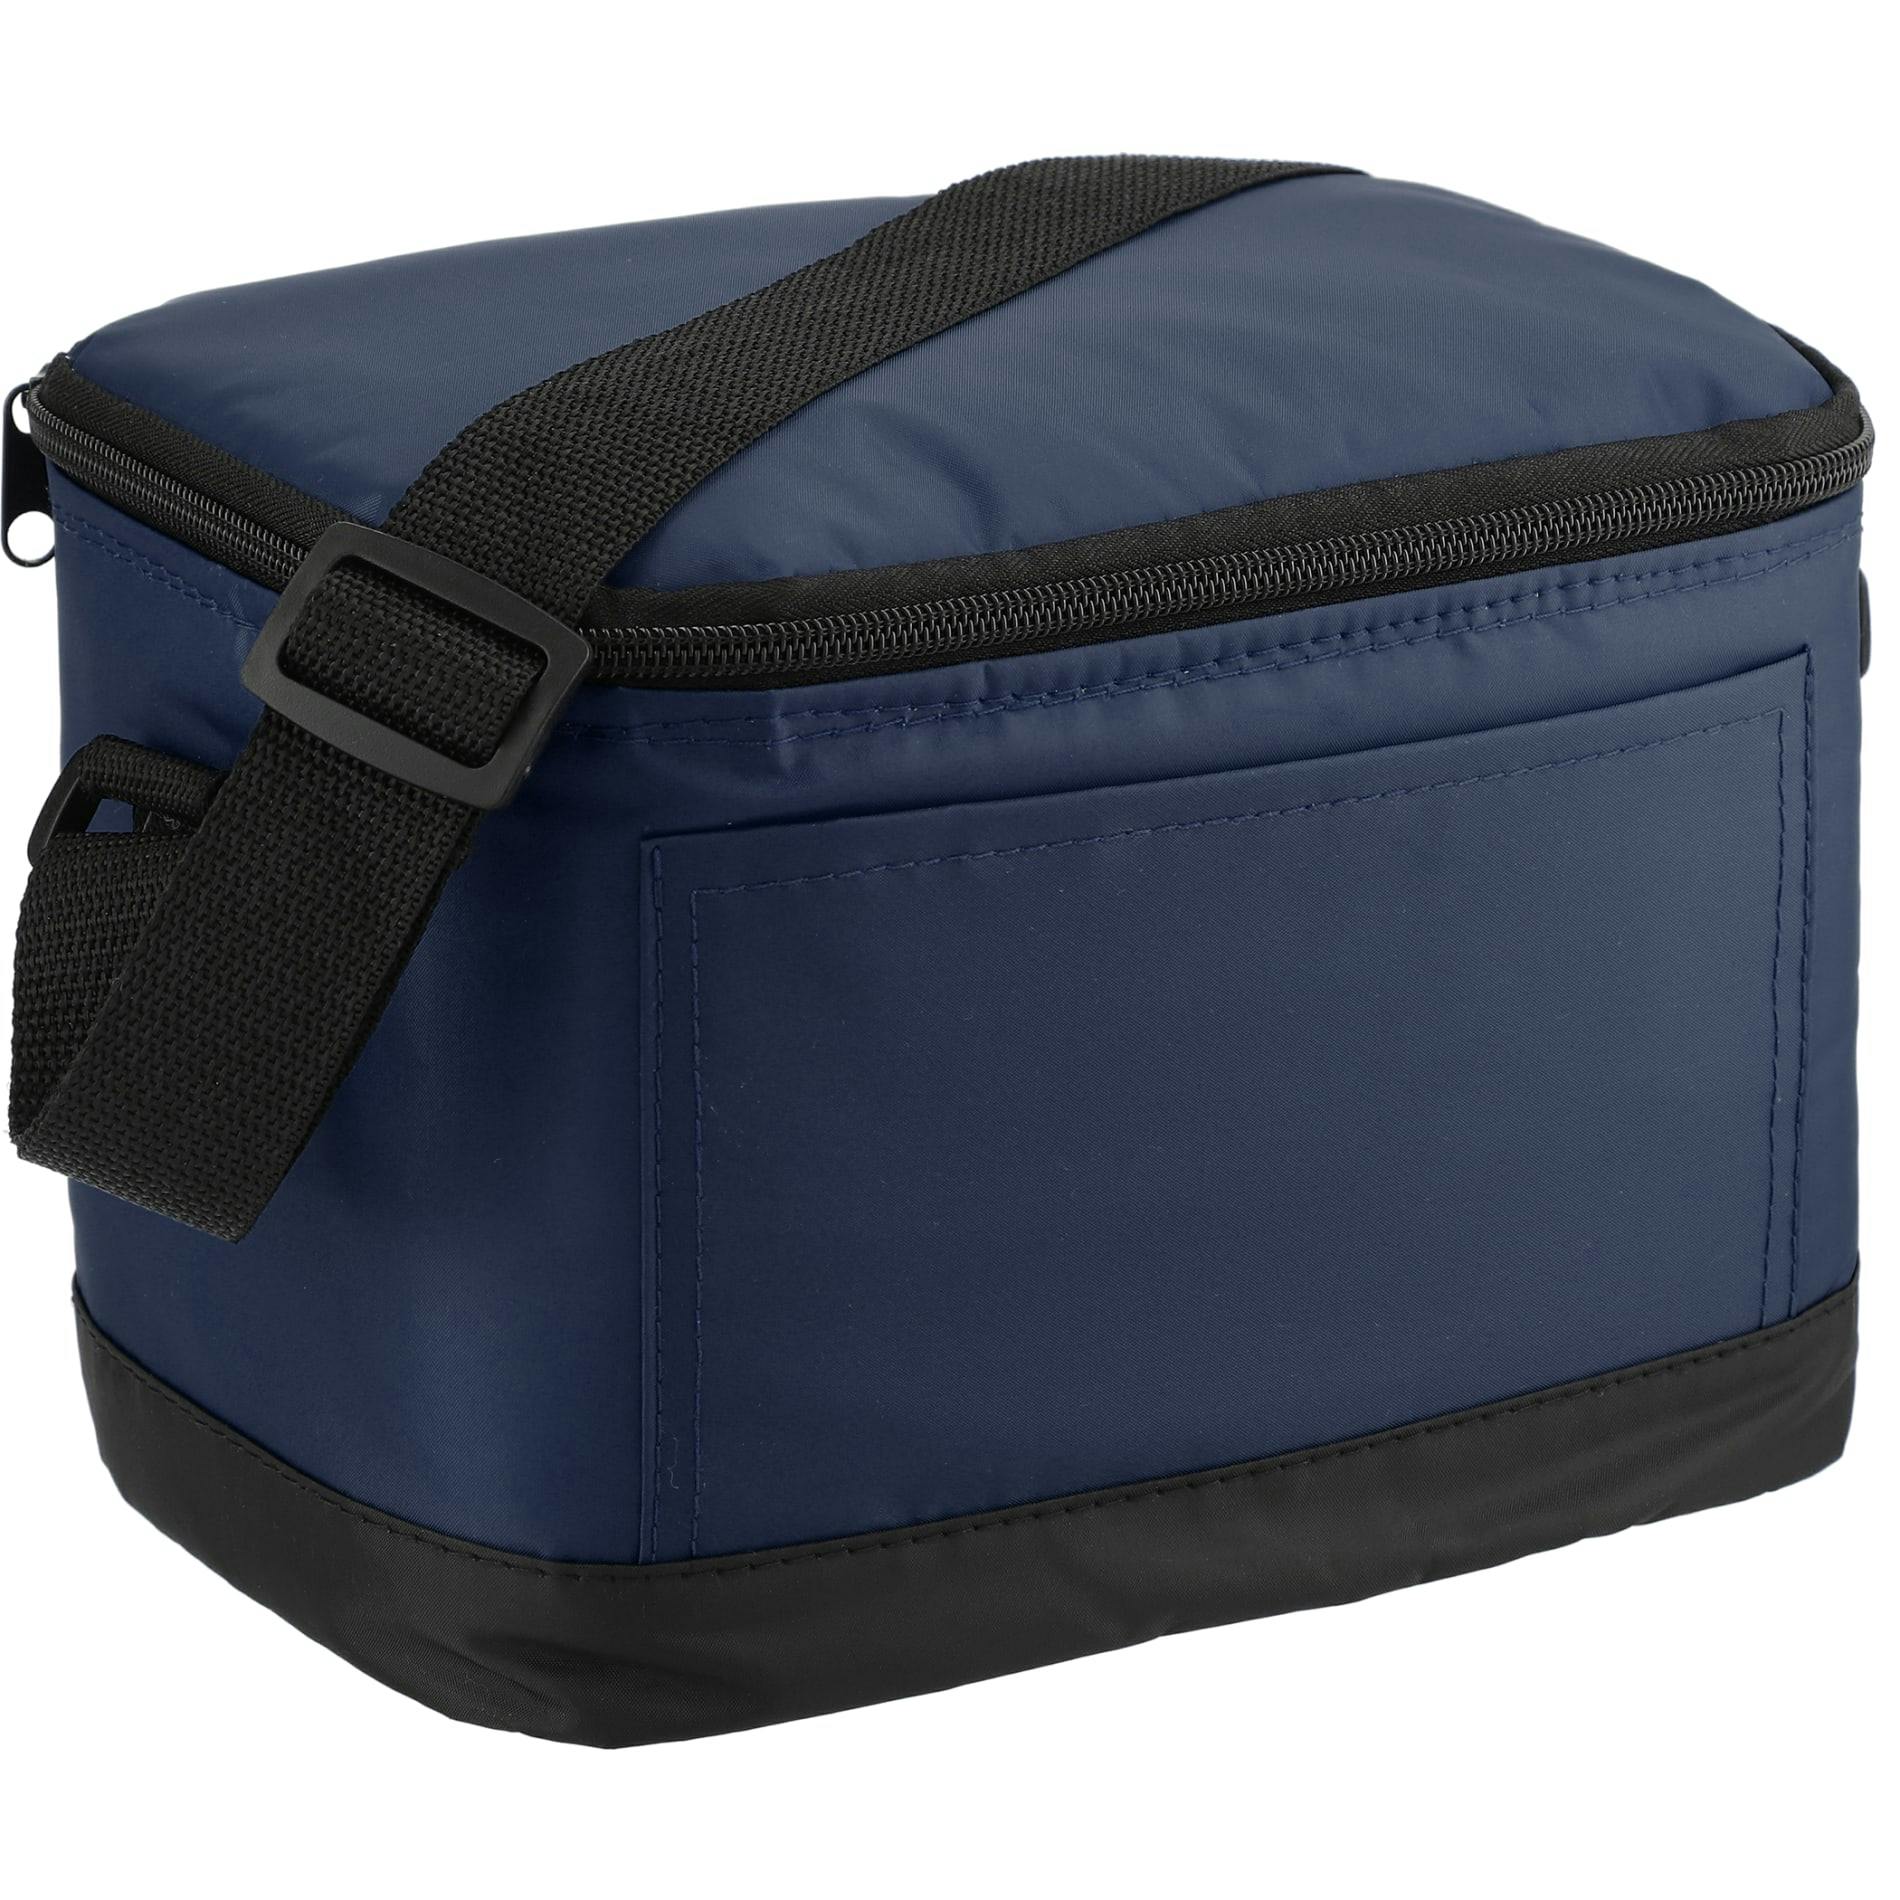 Classic 6-Can Lunch Cooler - additional Image 1